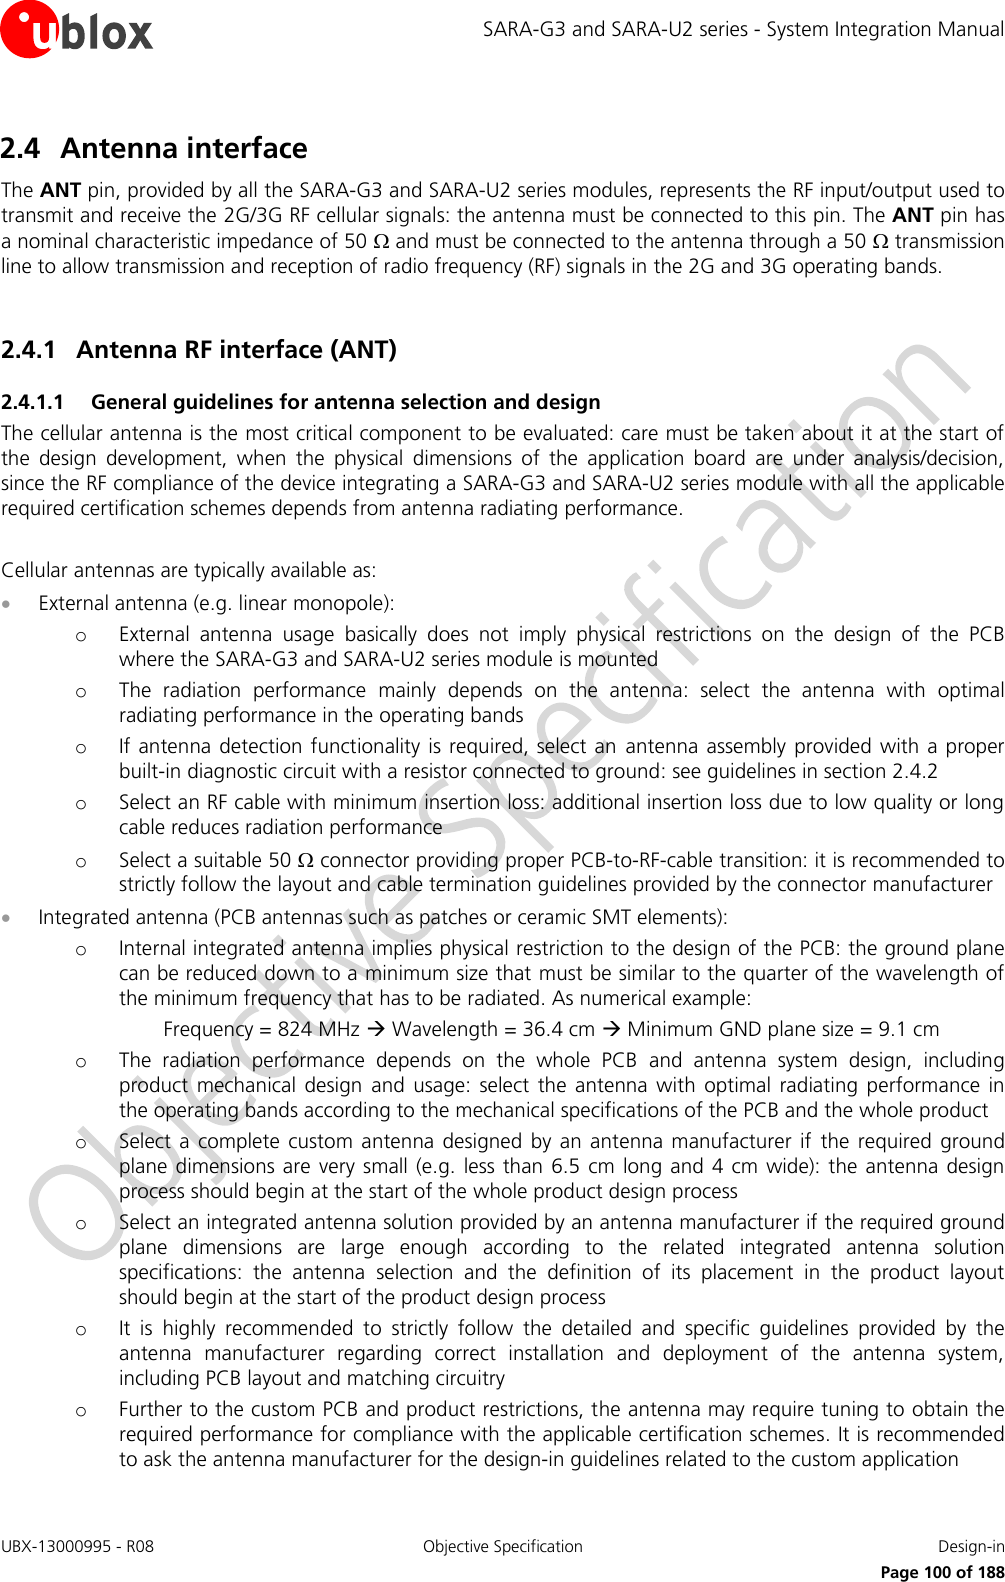 SARA-G3 and SARA-U2 series - System Integration Manual UBX-13000995 - R08  Objective Specification  Design-in     Page 100 of 188 2.4 Antenna interface The ANT pin, provided by all the SARA-G3 and SARA-U2 series modules, represents the RF input/output used to transmit and receive the 2G/3G RF cellular signals: the antenna must be connected to this pin. The ANT pin has a nominal characteristic impedance of 50  and must be connected to the antenna through a 50  transmission line to allow transmission and reception of radio frequency (RF) signals in the 2G and 3G operating bands.  2.4.1 Antenna RF interface (ANT) 2.4.1.1 General guidelines for antenna selection and design The cellular antenna is the most critical component to be evaluated: care must be taken about it at the start of the  design  development,  when  the  physical  dimensions  of  the  application  board  are  under  analysis/decision, since the RF compliance of the device integrating a SARA-G3 and SARA-U2 series module with all the applicable required certification schemes depends from antenna radiating performance.  Cellular antennas are typically available as:  External antenna (e.g. linear monopole): o External  antenna  usage  basically  does  not  imply  physical  restrictions  on  the  design  of  the  PCB where the SARA-G3 and SARA-U2 series module is mounted o The  radiation  performance  mainly  depends  on  the  antenna:  select  the  antenna  with  optimal radiating performance in the operating bands o If antenna  detection functionality is required, select  an  antenna assembly  provided  with a proper built-in diagnostic circuit with a resistor connected to ground: see guidelines in section 2.4.2 o Select an RF cable with minimum insertion loss: additional insertion loss due to low quality or long cable reduces radiation performance o Select a suitable 50  connector providing proper PCB-to-RF-cable transition: it is recommended to strictly follow the layout and cable termination guidelines provided by the connector manufacturer  Integrated antenna (PCB antennas such as patches or ceramic SMT elements): o Internal integrated antenna implies physical restriction to the design of the PCB: the ground plane can be reduced down to a minimum size that must be similar to the quarter of the wavelength of the minimum frequency that has to be radiated. As numerical example:   Frequency = 824 MHz  Wavelength = 36.4 cm  Minimum GND plane size = 9.1 cm o The  radiation  performance  depends  on  the  whole  PCB  and  antenna  system  design,  including product  mechanical  design  and  usage:  select  the  antenna  with  optimal radiating  performance  in the operating bands according to the mechanical specifications of the PCB and the whole product o Select  a complete custom antenna  designed  by an  antenna manufacturer  if  the required  ground plane dimensions are very  small (e.g.  less than 6.5 cm  long and 4  cm wide): the antenna design process should begin at the start of the whole product design process o Select an integrated antenna solution provided by an antenna manufacturer if the required ground plane  dimensions  are  large  enough  according  to  the  related  integrated  antenna  solution specifications:  the  antenna  selection  and  the  definition  of  its  placement  in  the  product  layout should begin at the start of the product design process o It  is  highly  recommended  to  strictly  follow  the  detailed  and  specific  guidelines  provided  by  the antenna  manufacturer  regarding  correct  installation  and  deployment  of  the  antenna  system, including PCB layout and matching circuitry o Further to the custom PCB and product restrictions, the antenna may require tuning to obtain the required performance for compliance with the applicable certification schemes. It is recommended to ask the antenna manufacturer for the design-in guidelines related to the custom application 